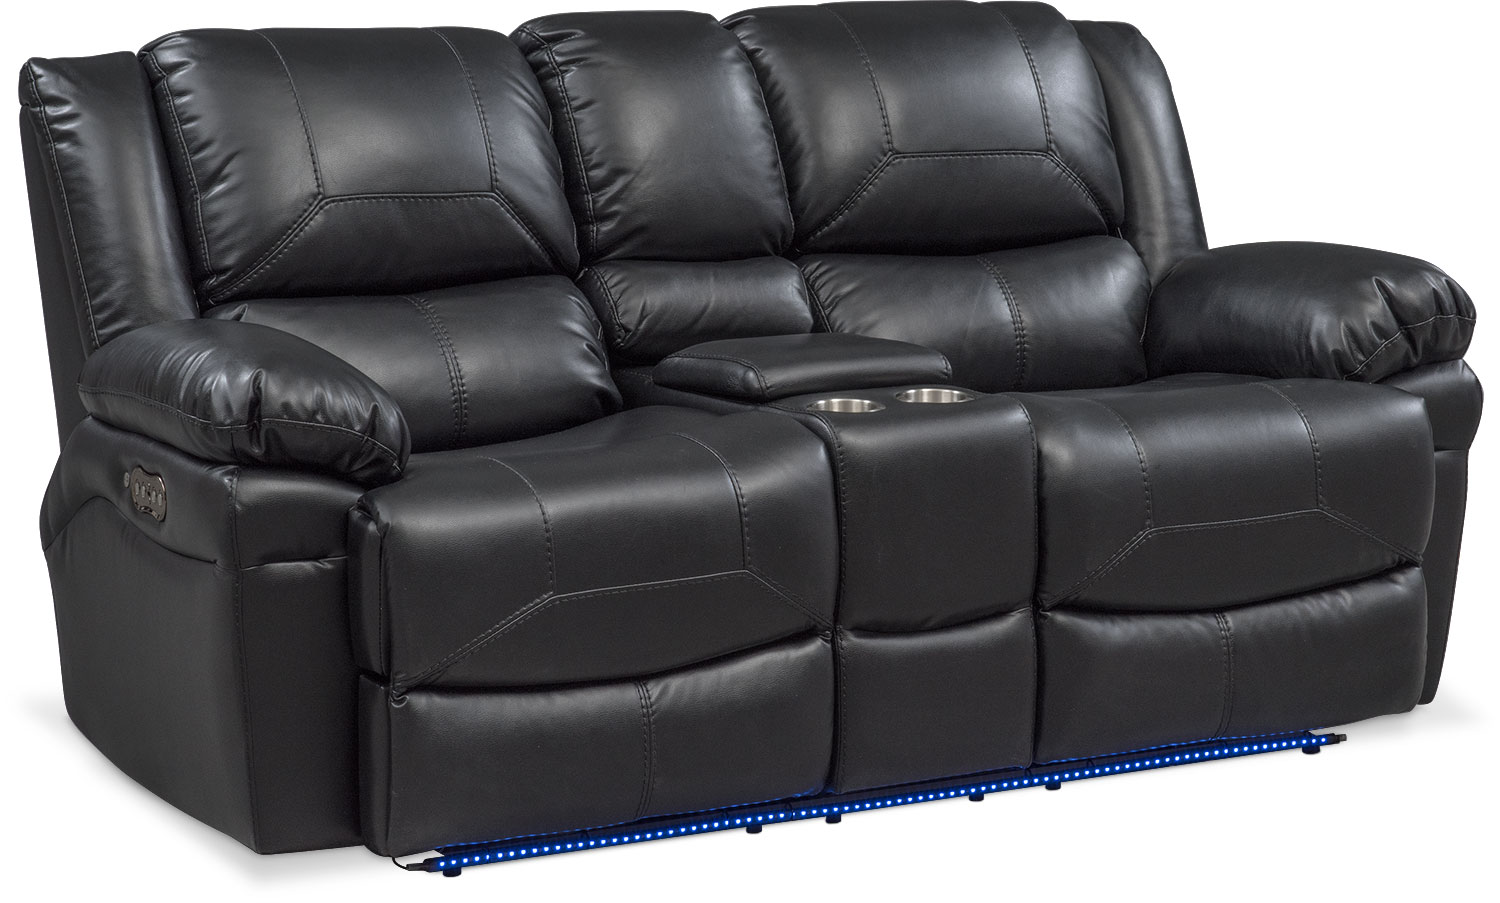 Monza Dual Power Reclining Loveseat with Console - Black